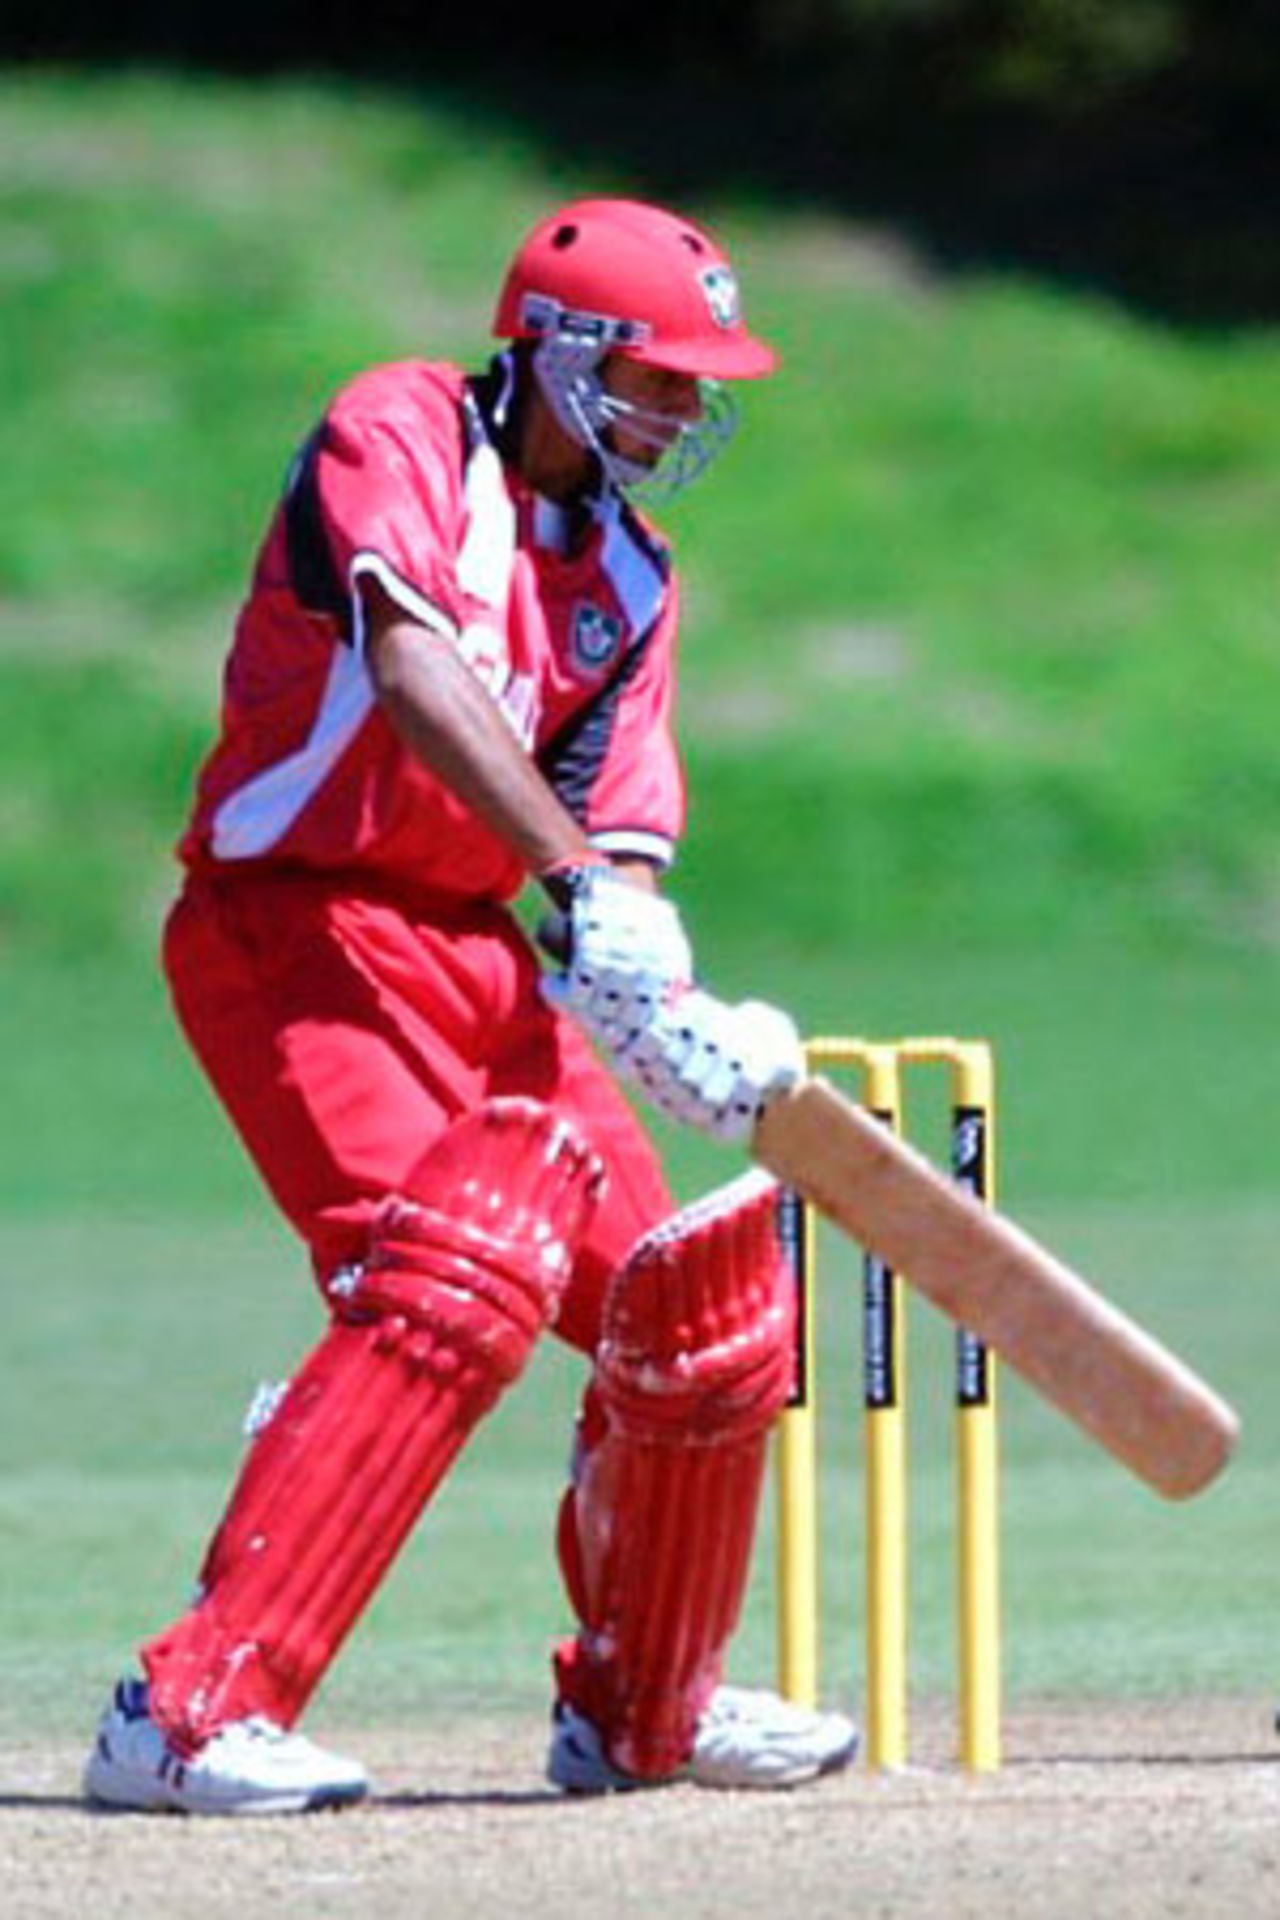 Canada Under-19 batsman Umar Bhatti cuts a delivery during his innings of 33. ICC Under-19 World Cup Group A: Bangladesh Under-19s v Canada Under-19s at Colin Maiden Park, Auckland, 22 January 2002.